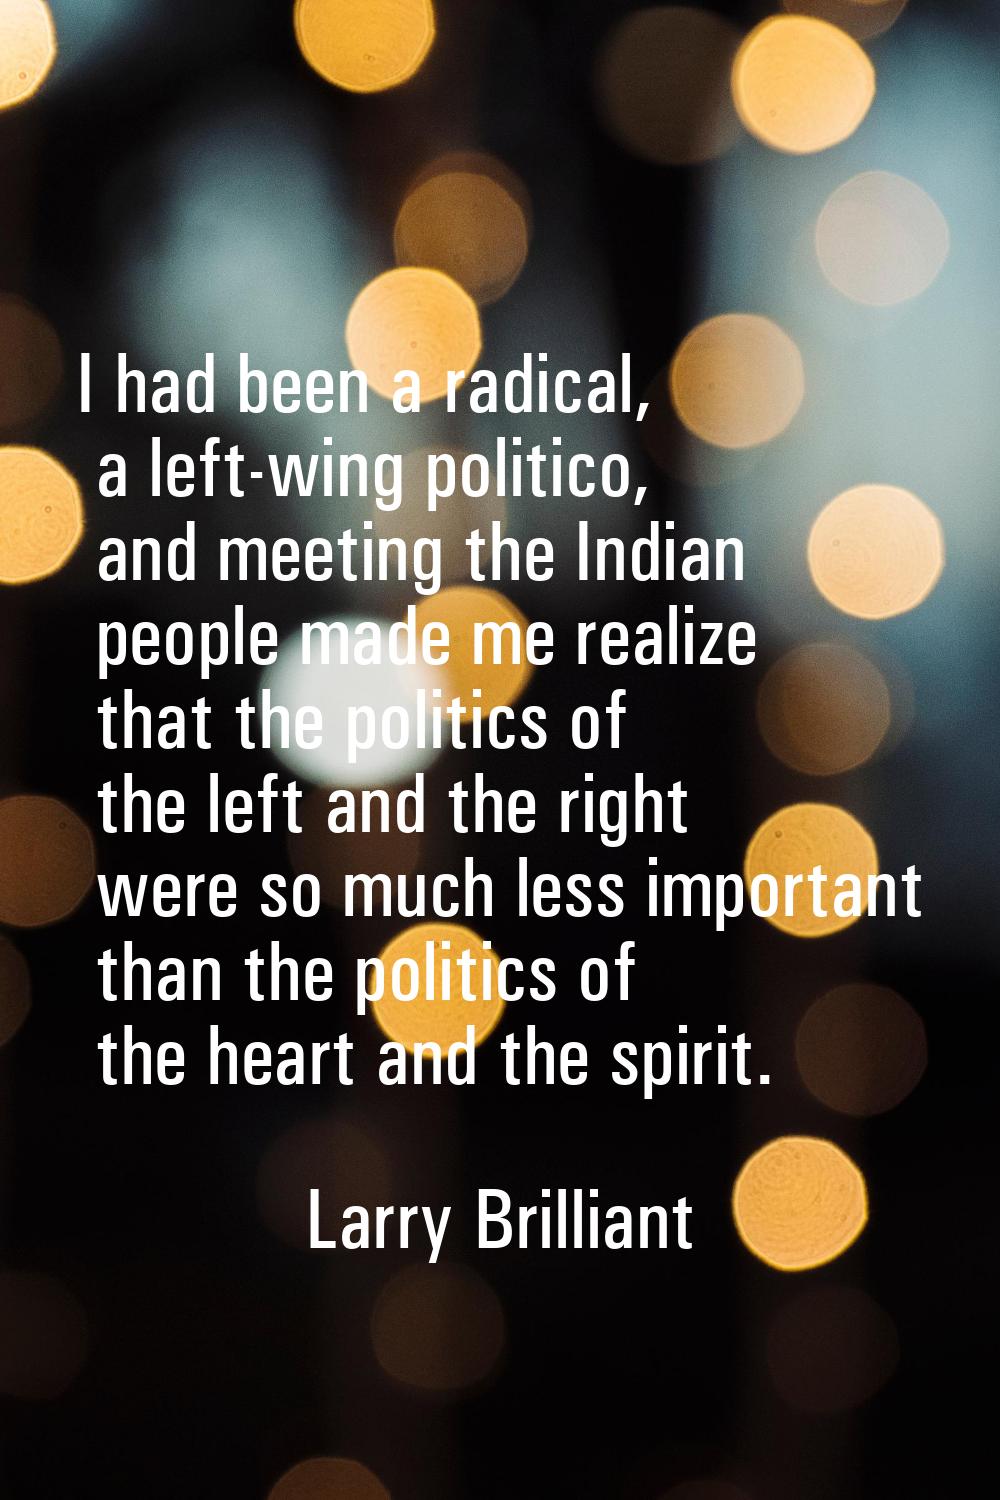 I had been a radical, a left-wing politico, and meeting the Indian people made me realize that the 